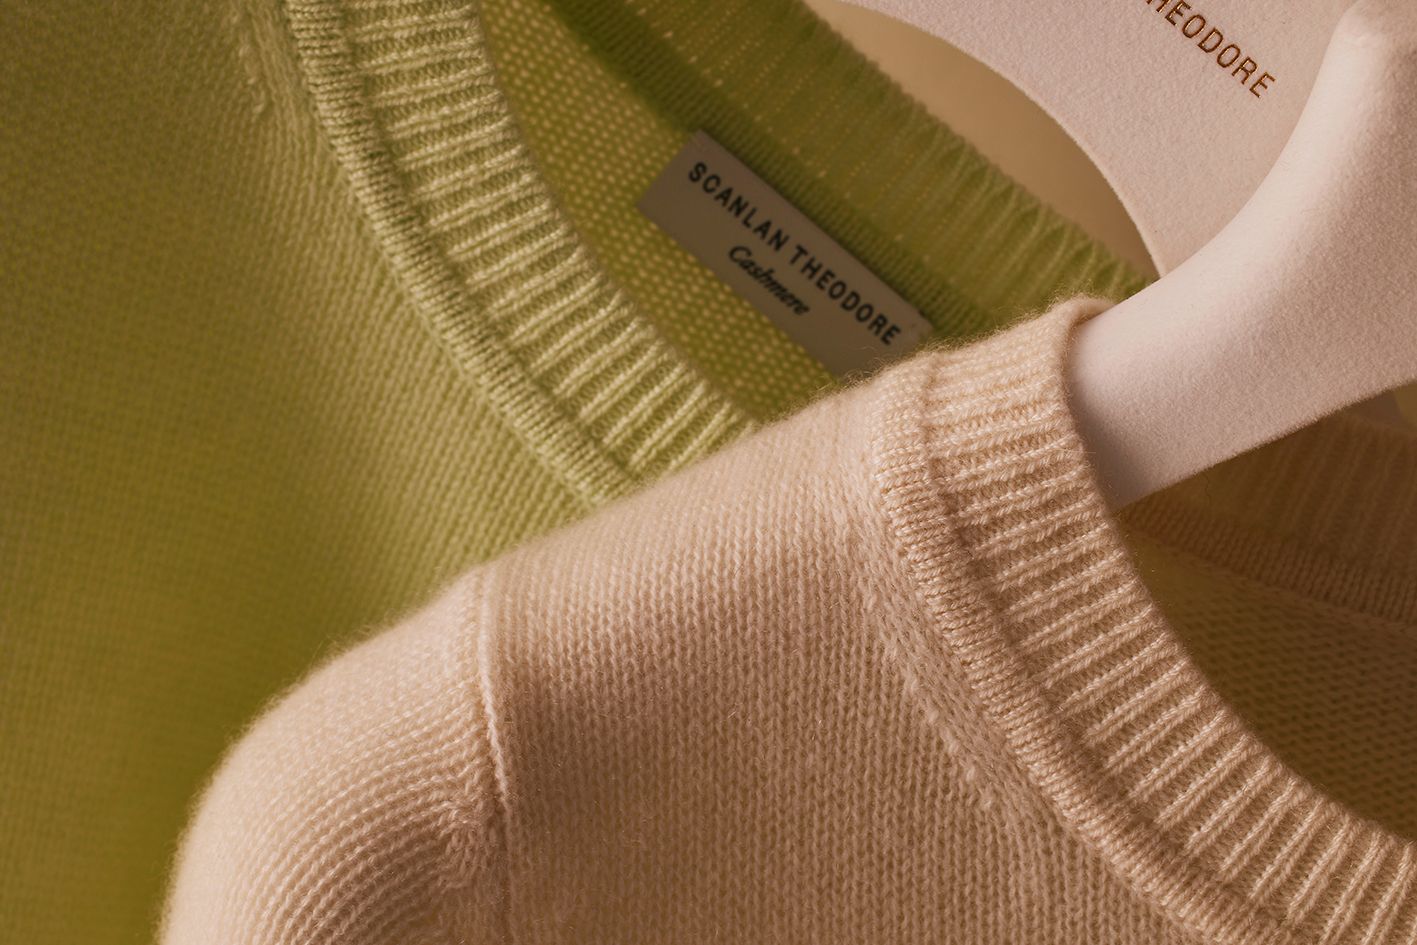 Scanlan Theodore cashmere with close detailed view of collar in soft sorbet tones